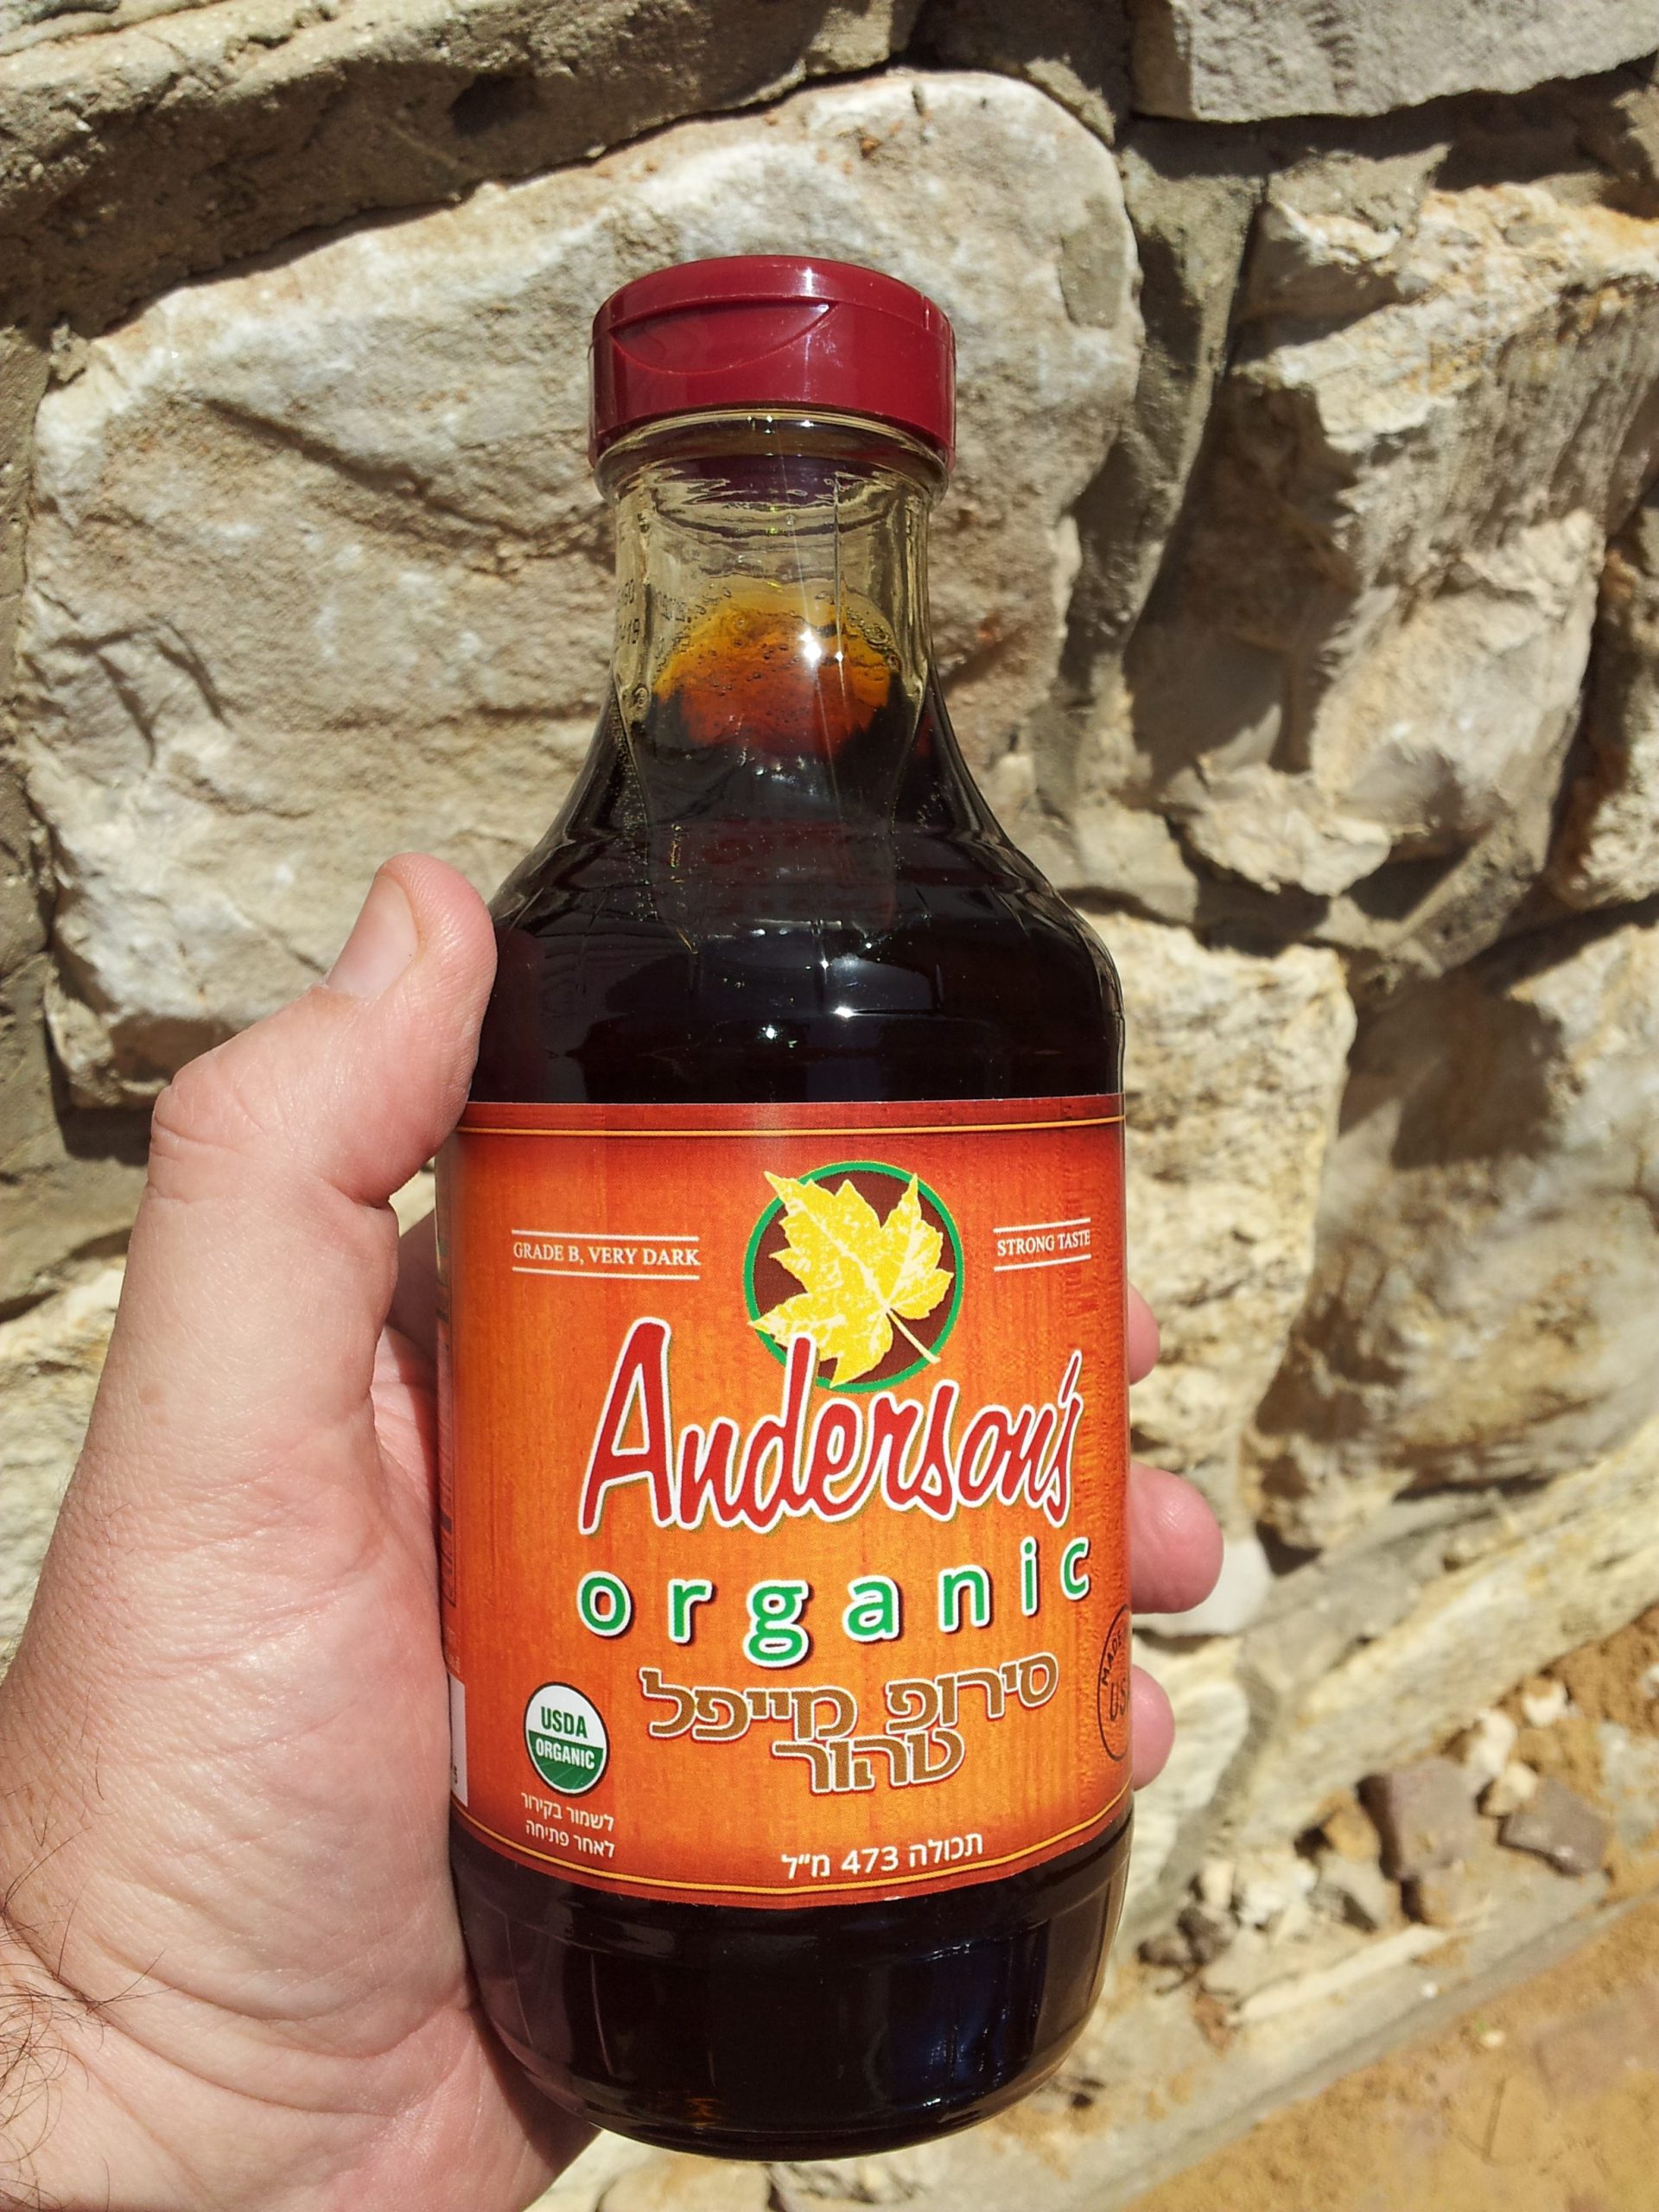 Anderson's Maple Syrup